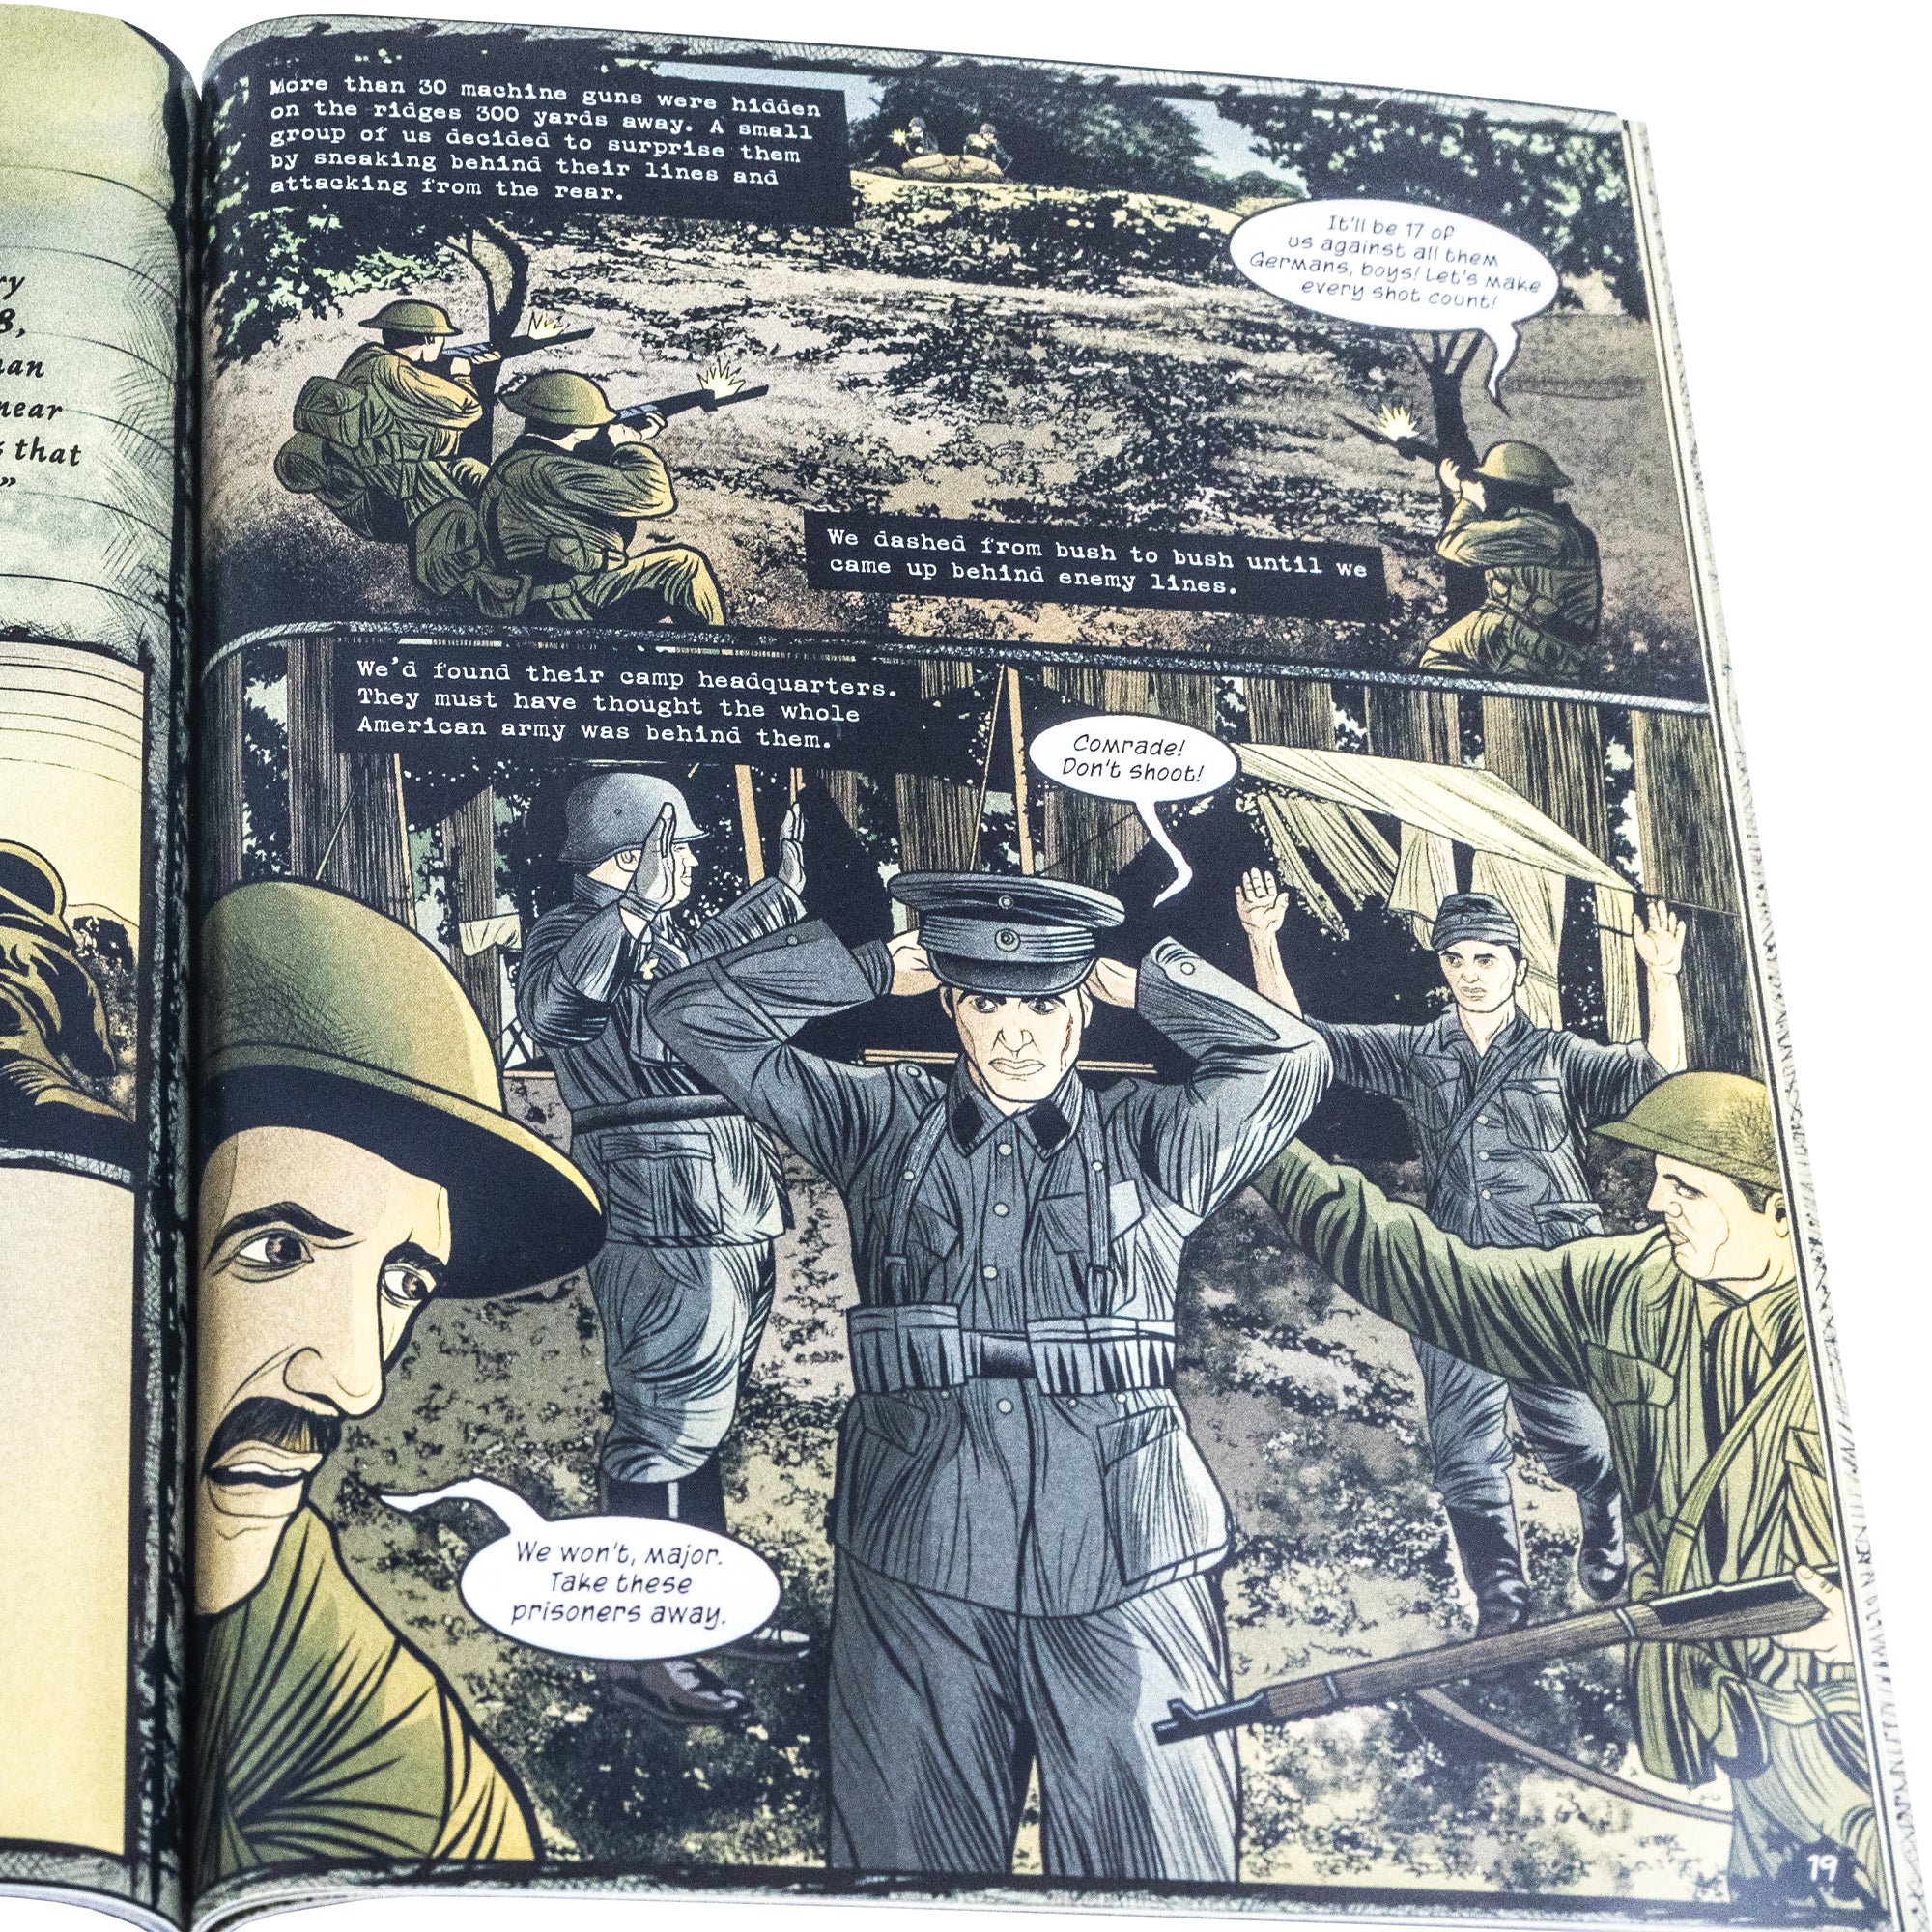 True Stories of War open to show inside pages. The left page is cut off near the spine, so you are not able to see that page. The right page shows American soldiers sneaking up behind German soldiers operating machine guns on a ridge and taking them captive. The book is a comic book style layout with squared illustrations and talk bubbles.